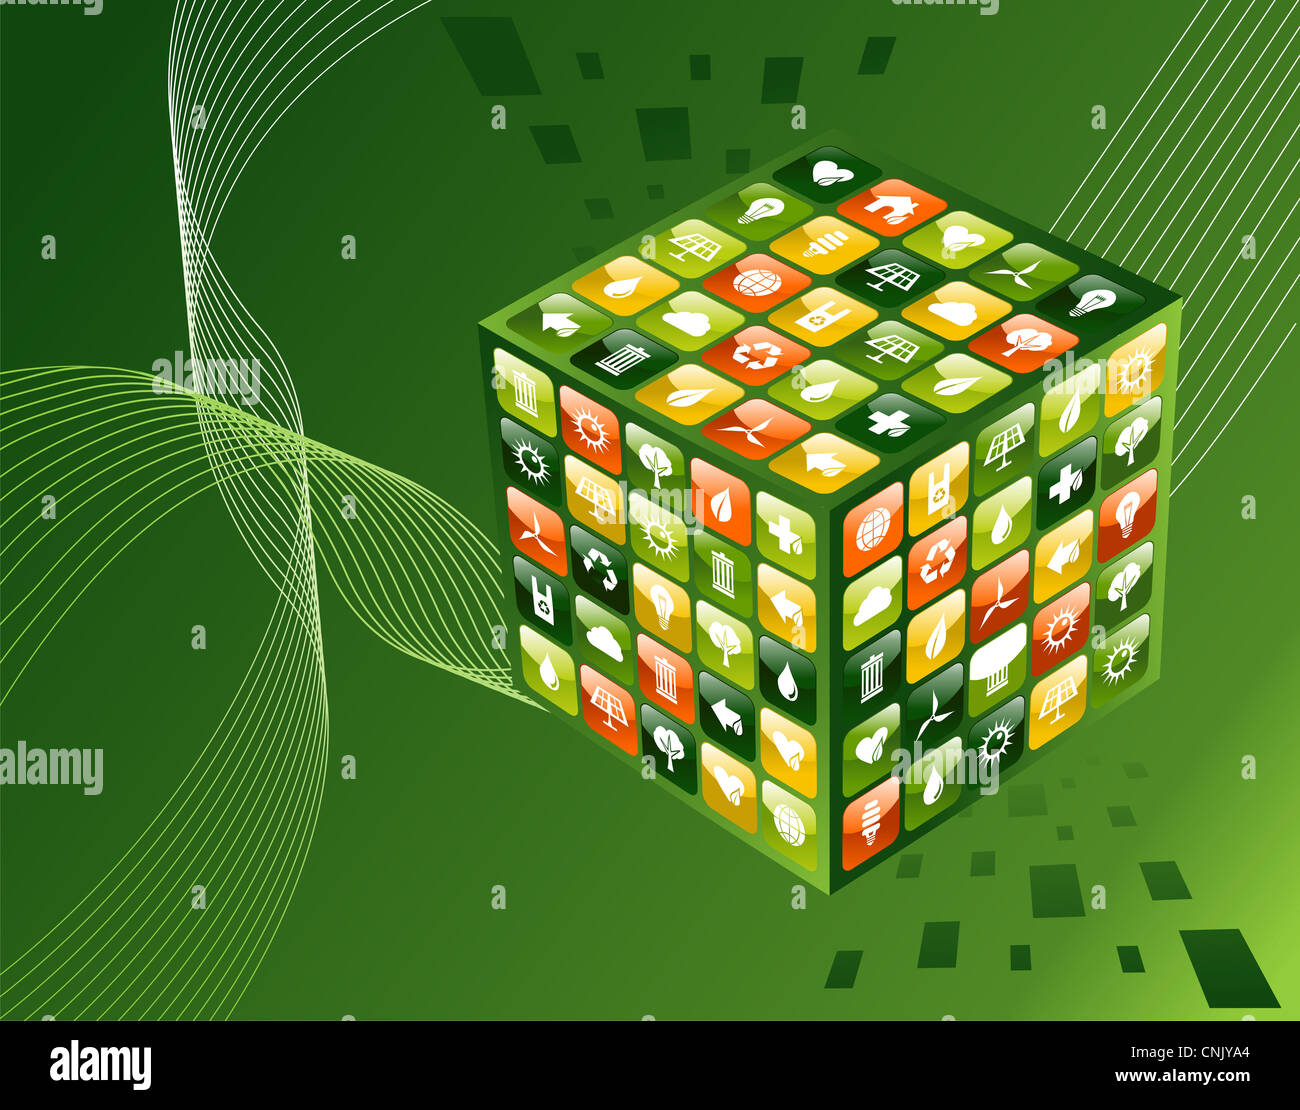 Eco friendly iphone app cube with icon set background. Vector file available. Stock Photo